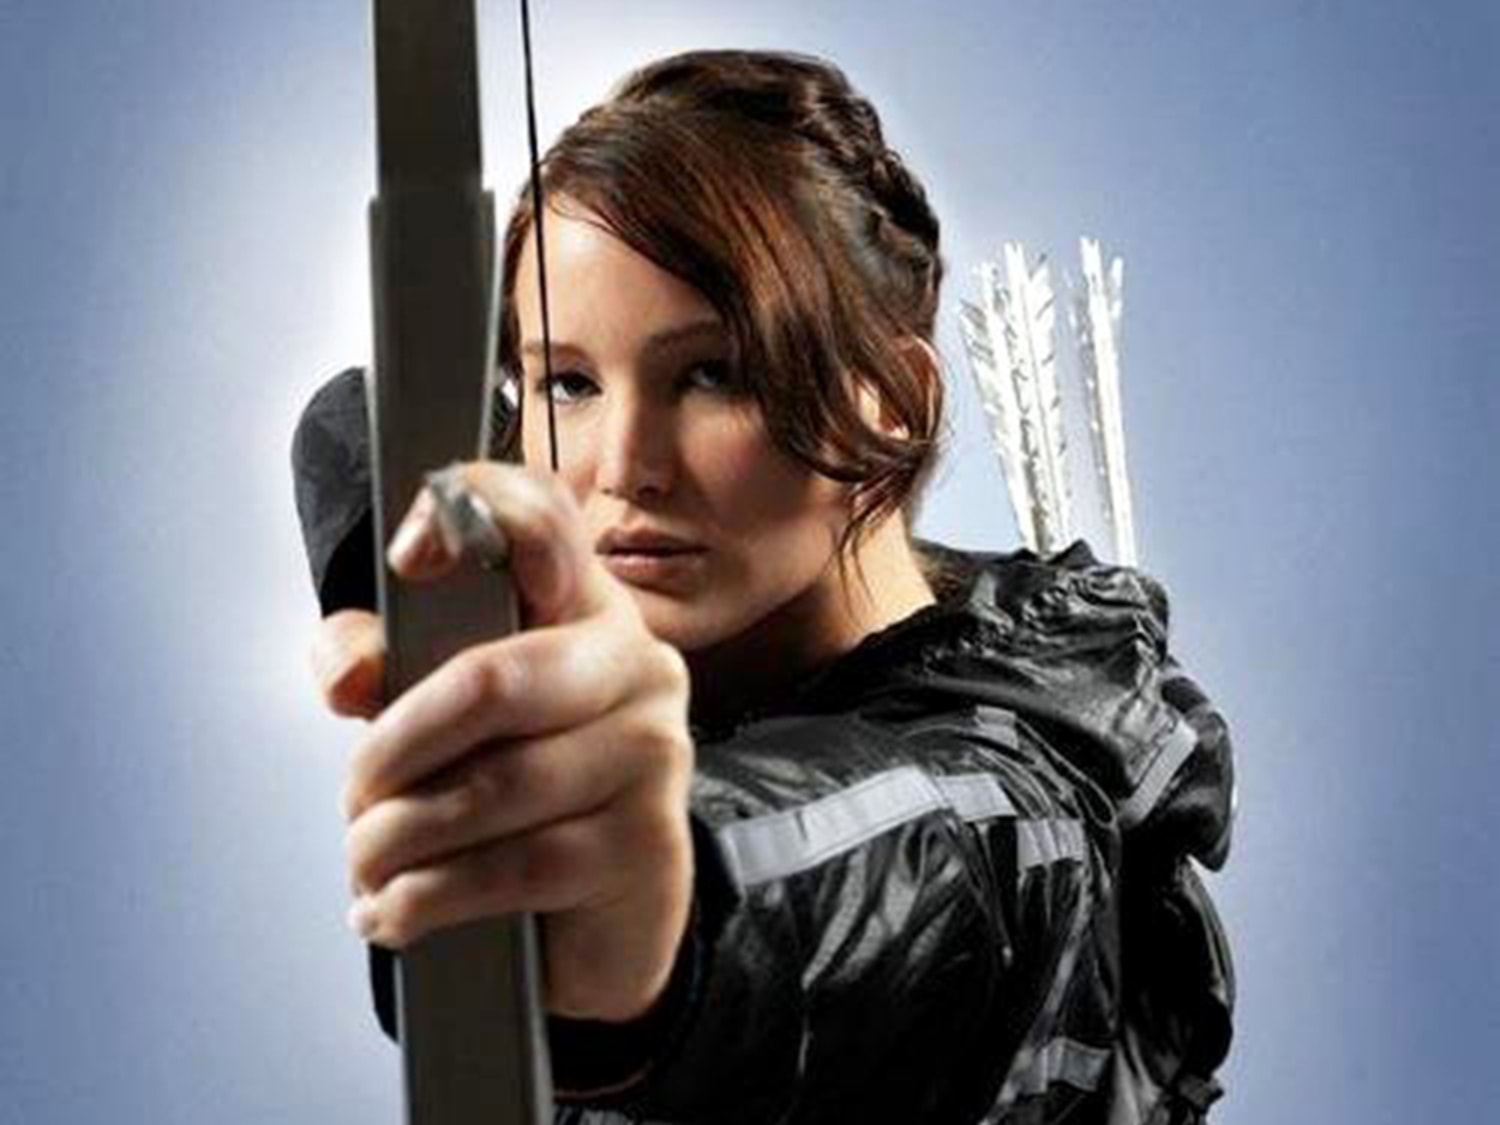 Best of Katniss in the Arena Pt. 2  The Hunger Games: Catching Fire 